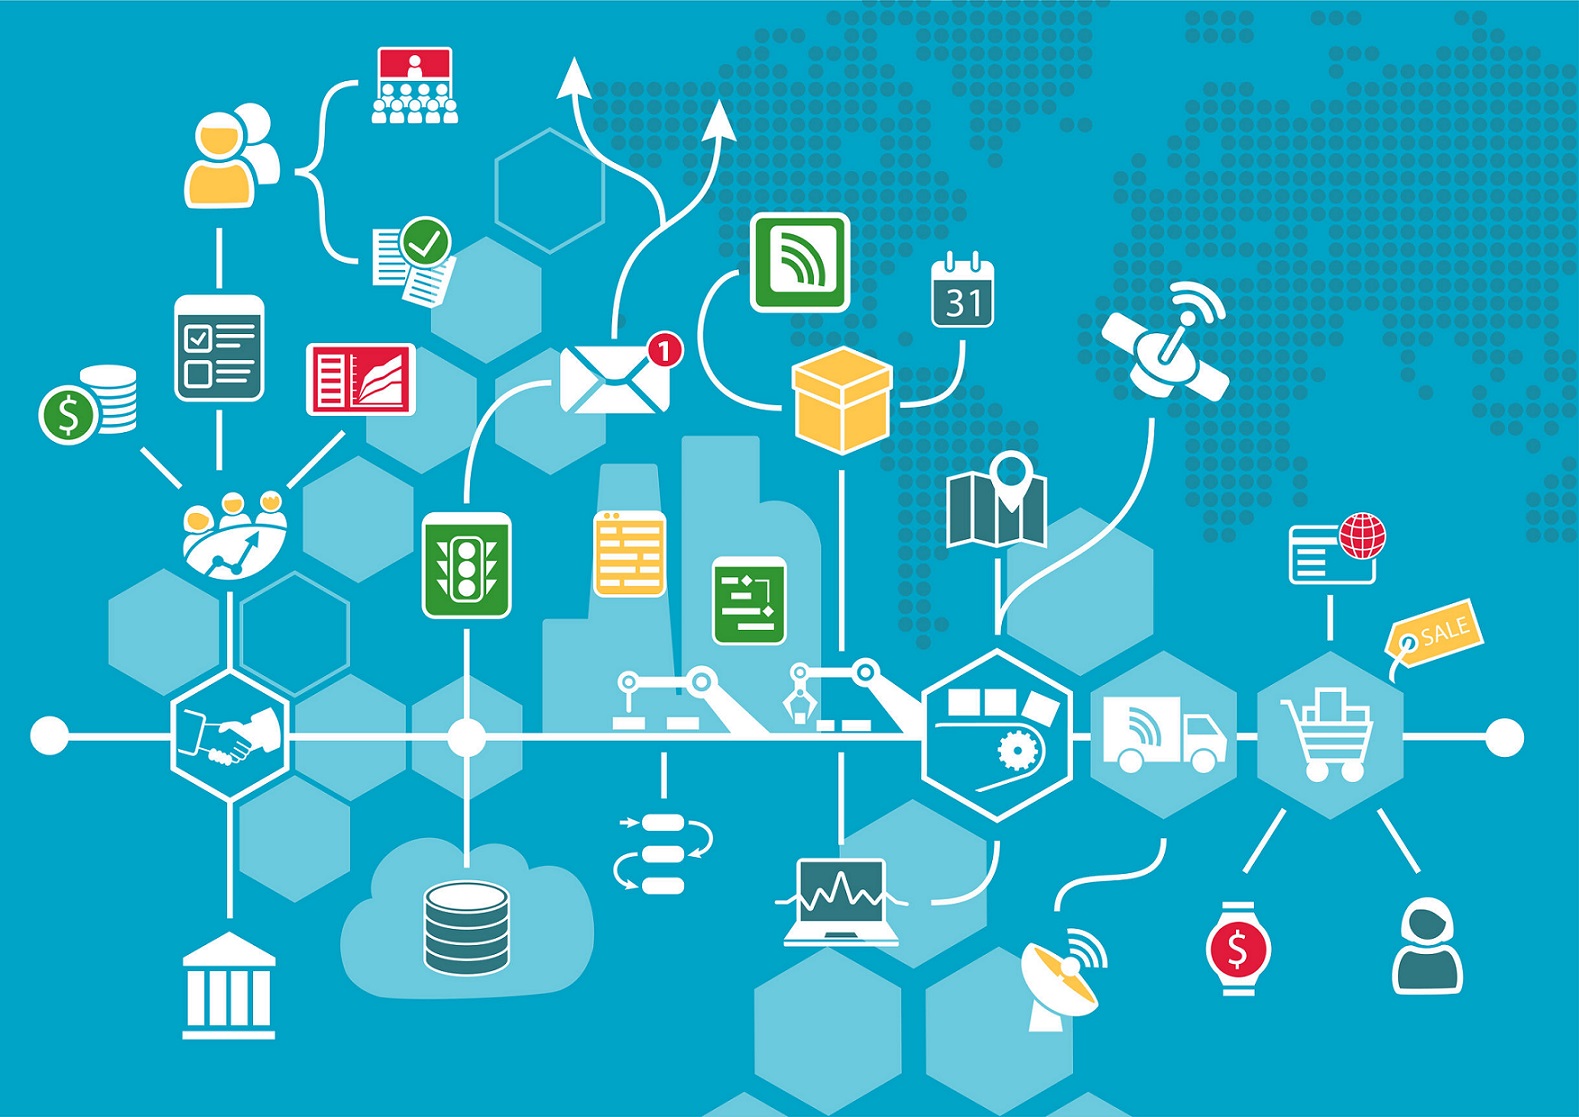 How planning for the IoT can help drive business success